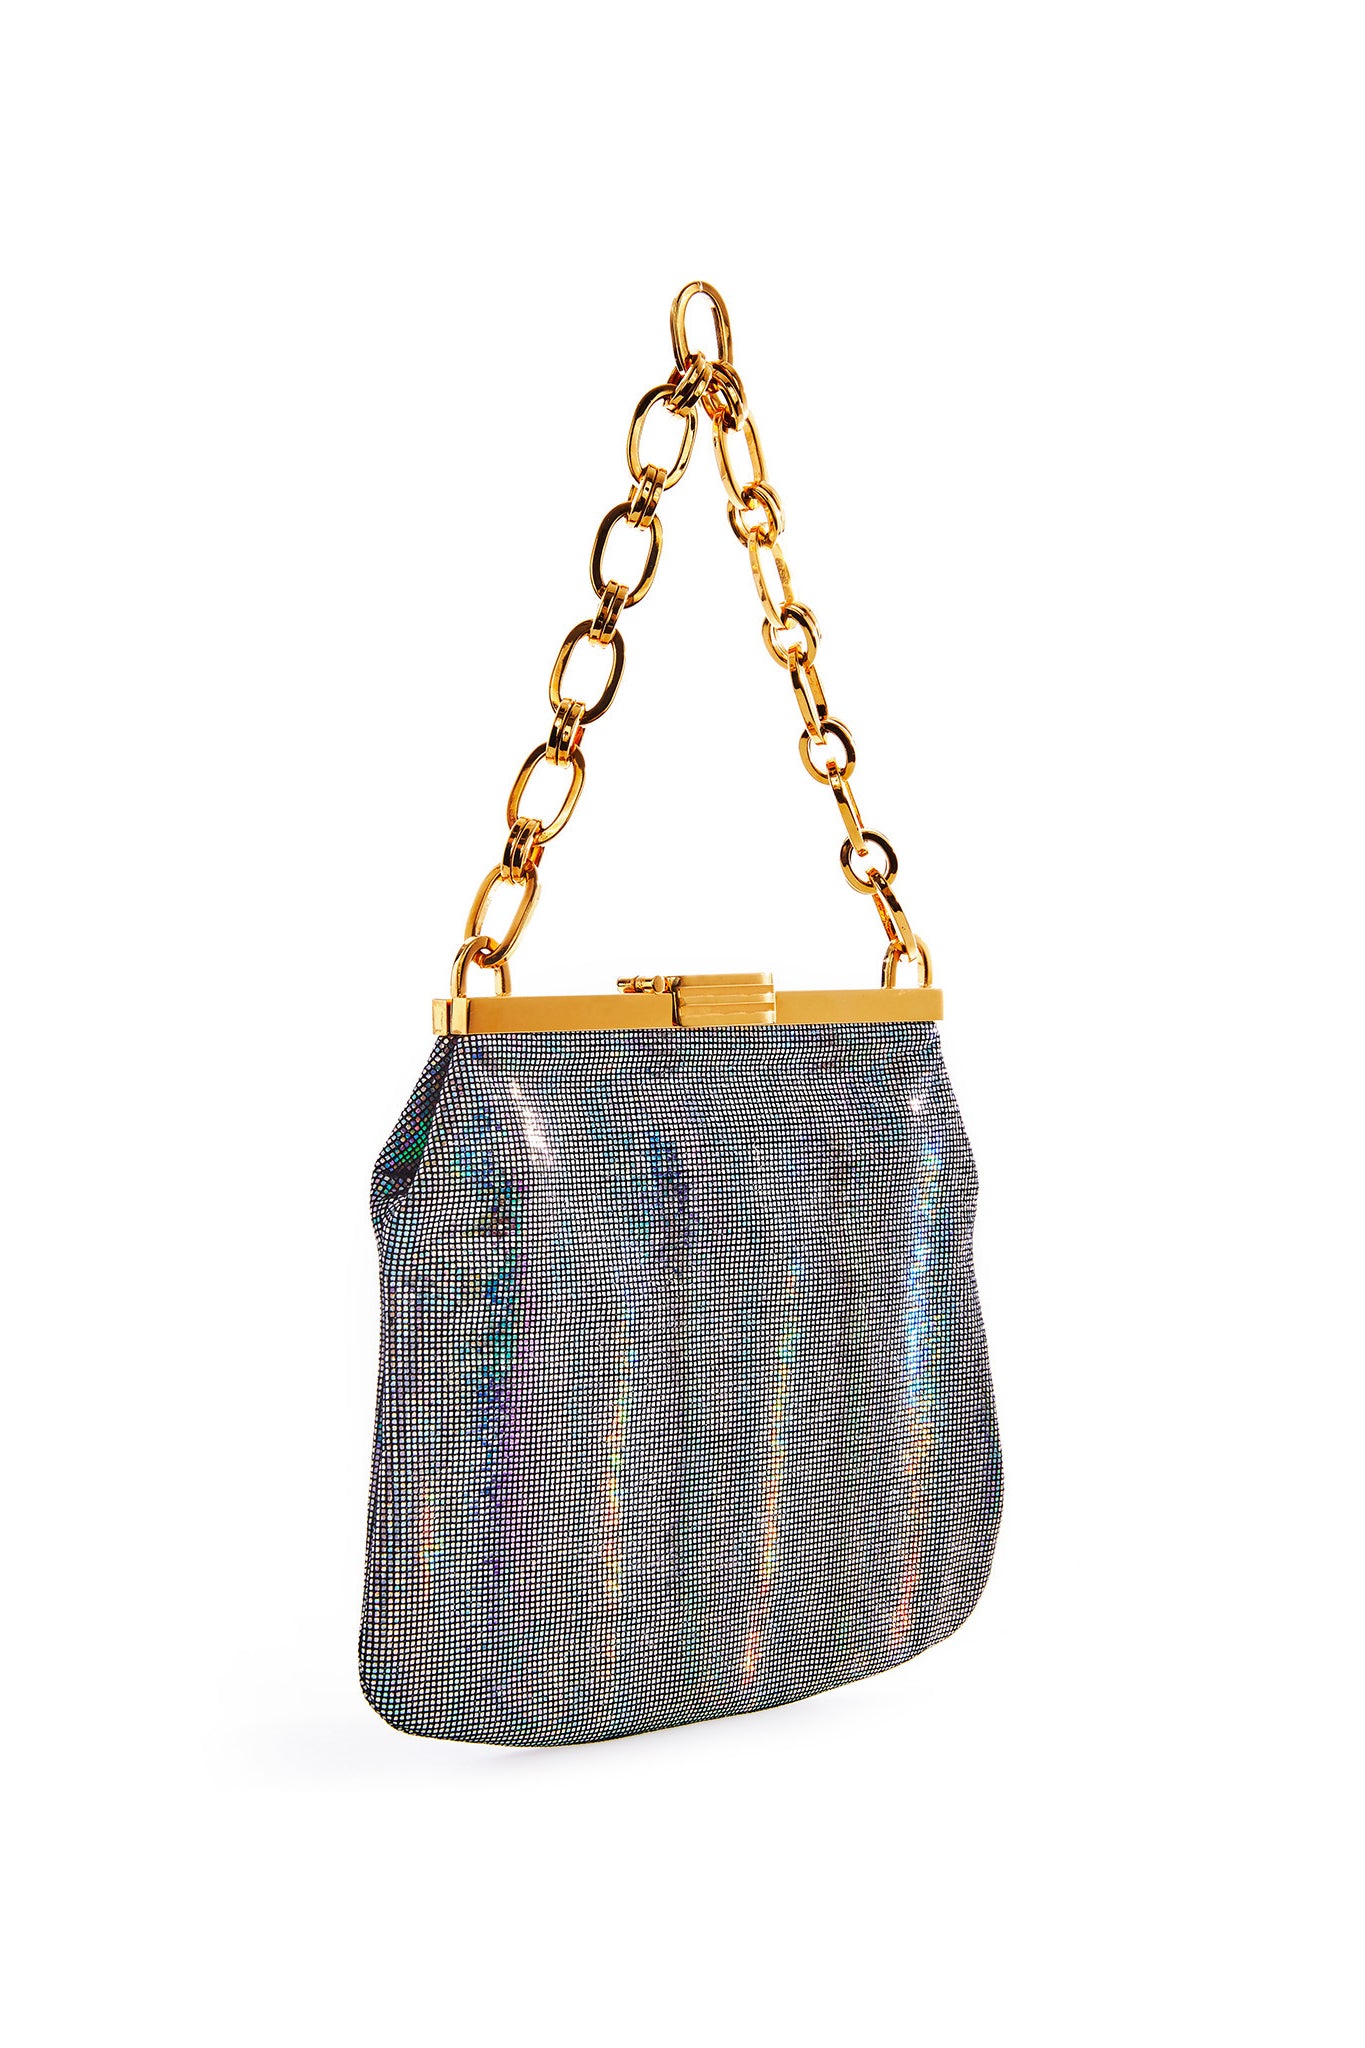 5 AM Bag in Titania Holographic Leather